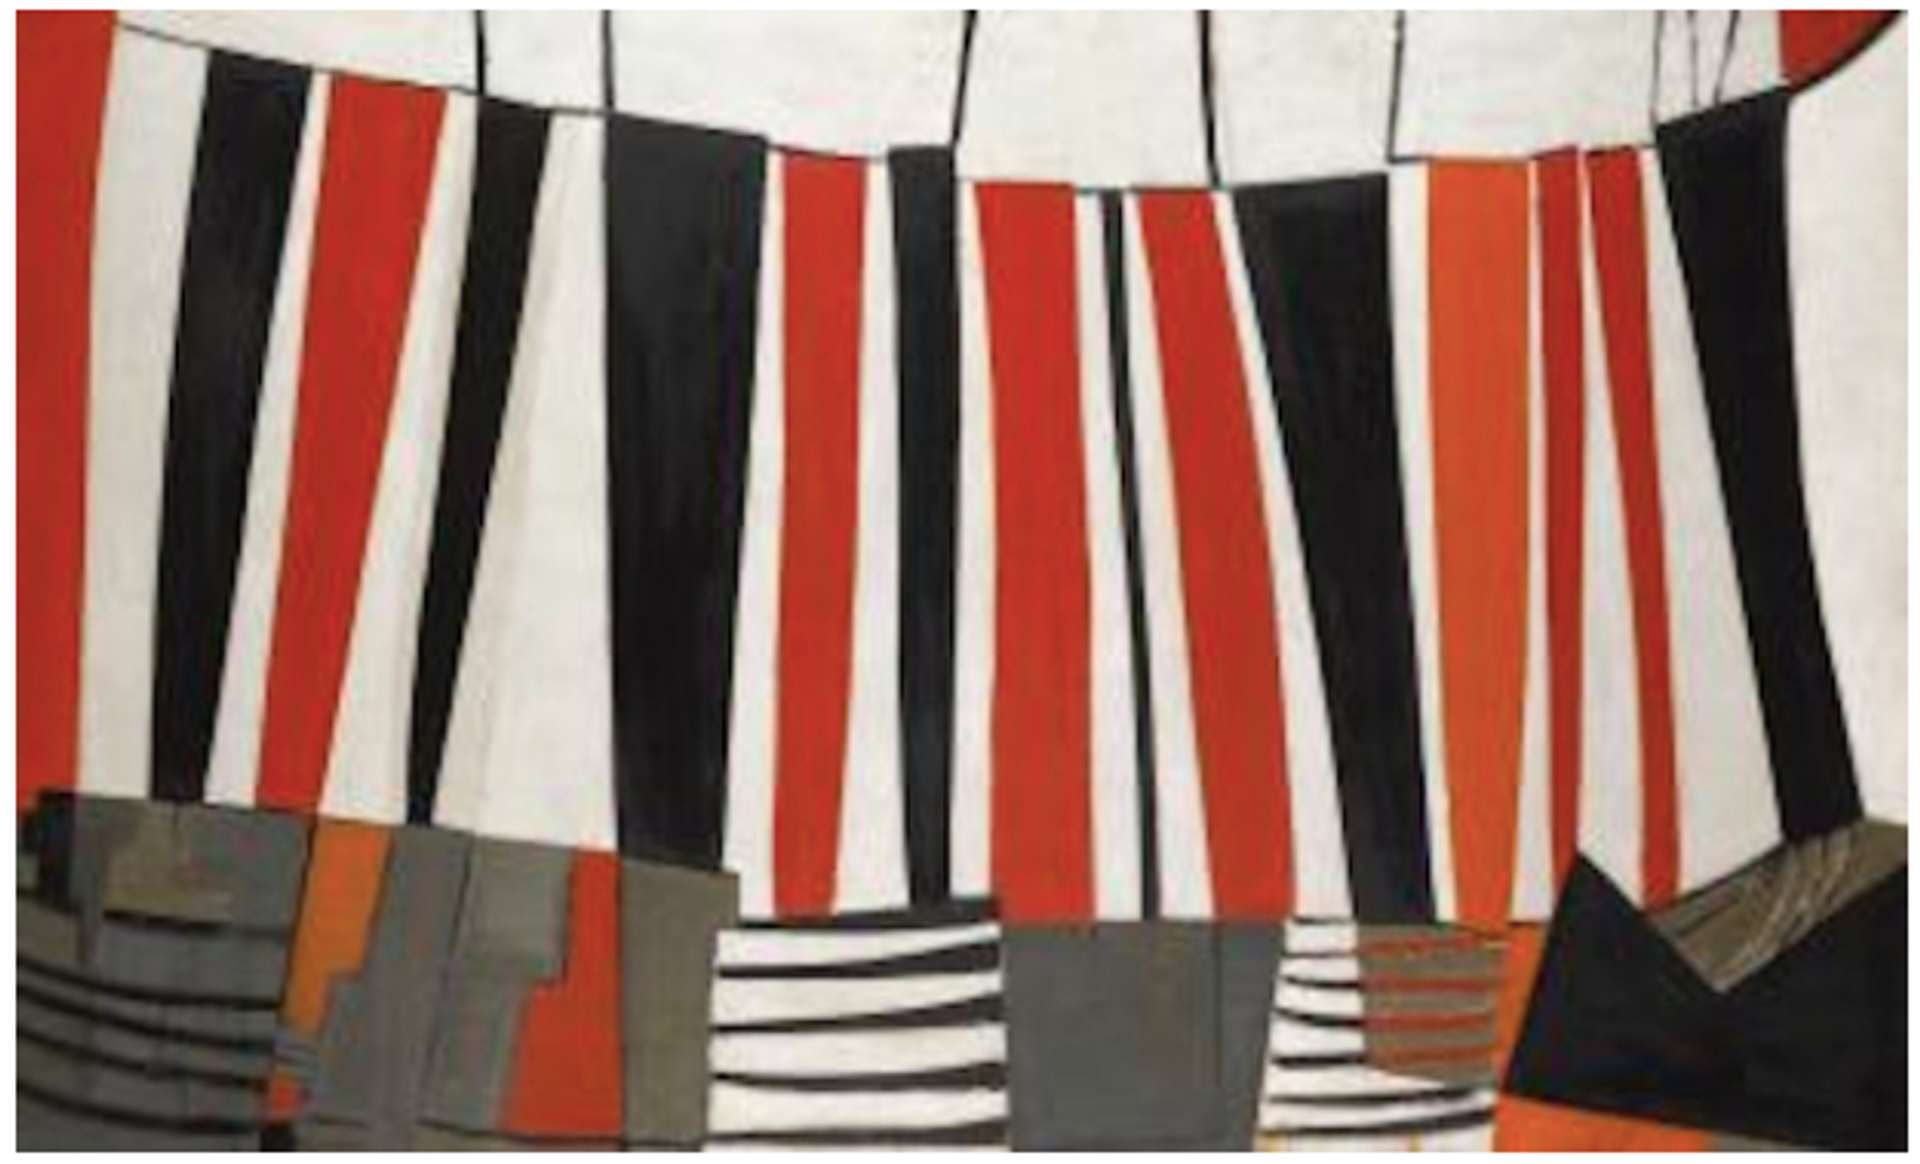 An abstract painting consisting of vertical lines in red, white, and black. The composition is divided by three horizontal sections. The top section features white with thin black lines resembling teeth, while the bottom section is a mix of abstracted vertical and horizontal lines in shades of grey, orange, and red.